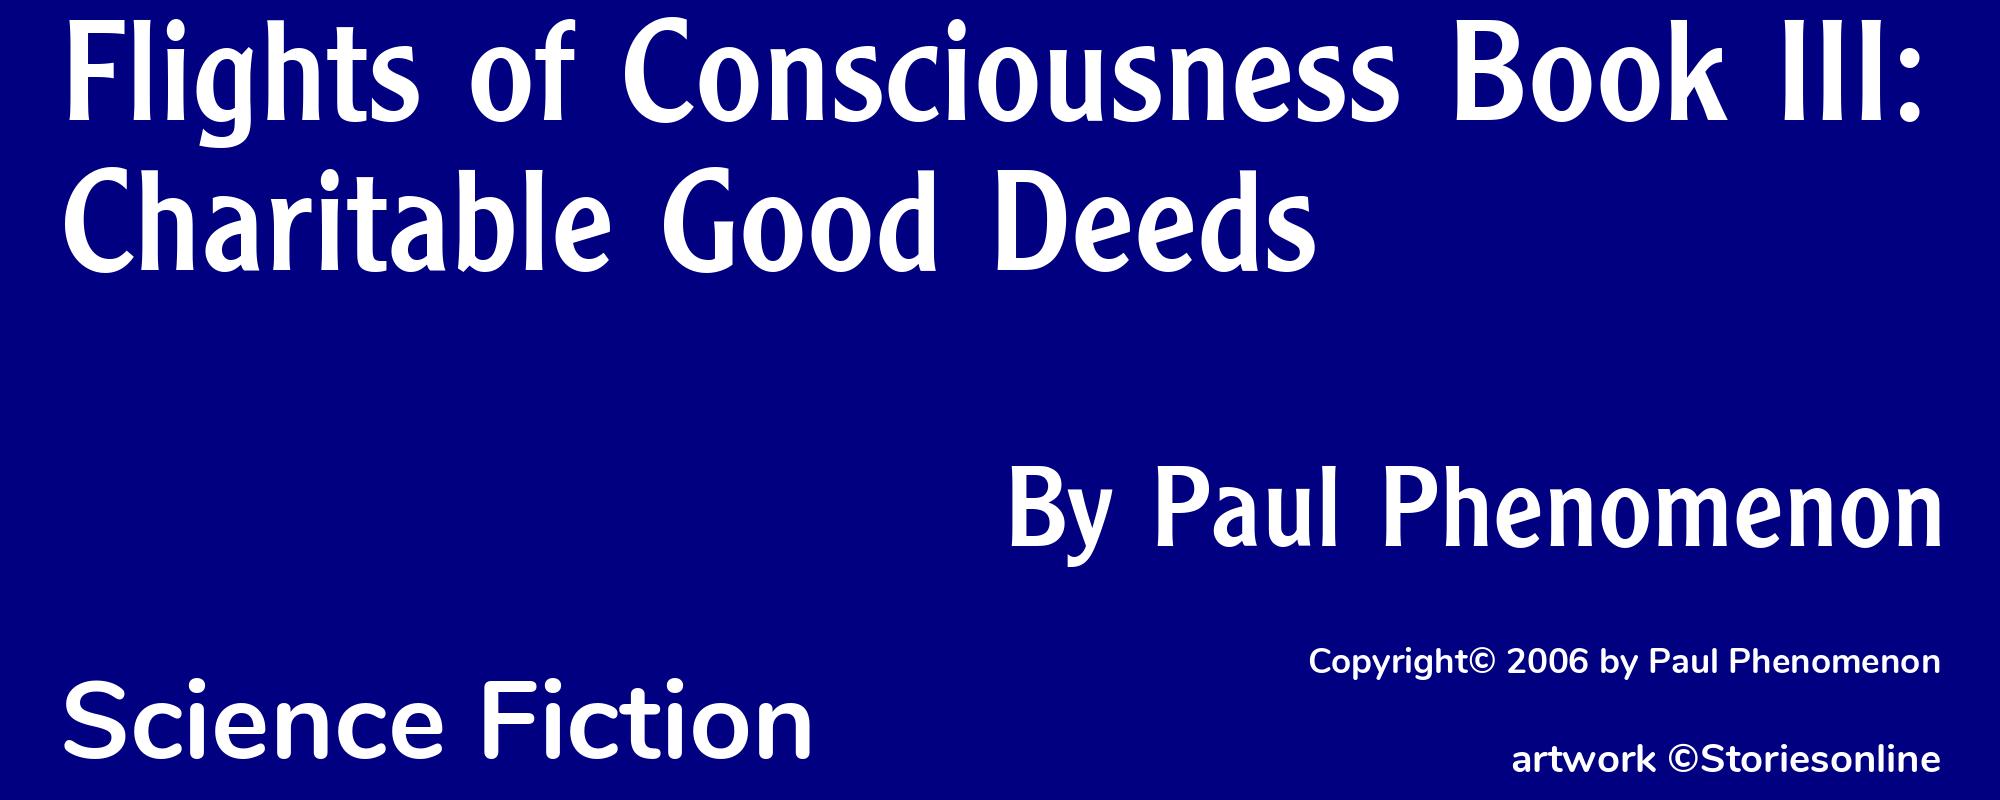 Flights of Consciousness Book III: Charitable Good Deeds - Cover